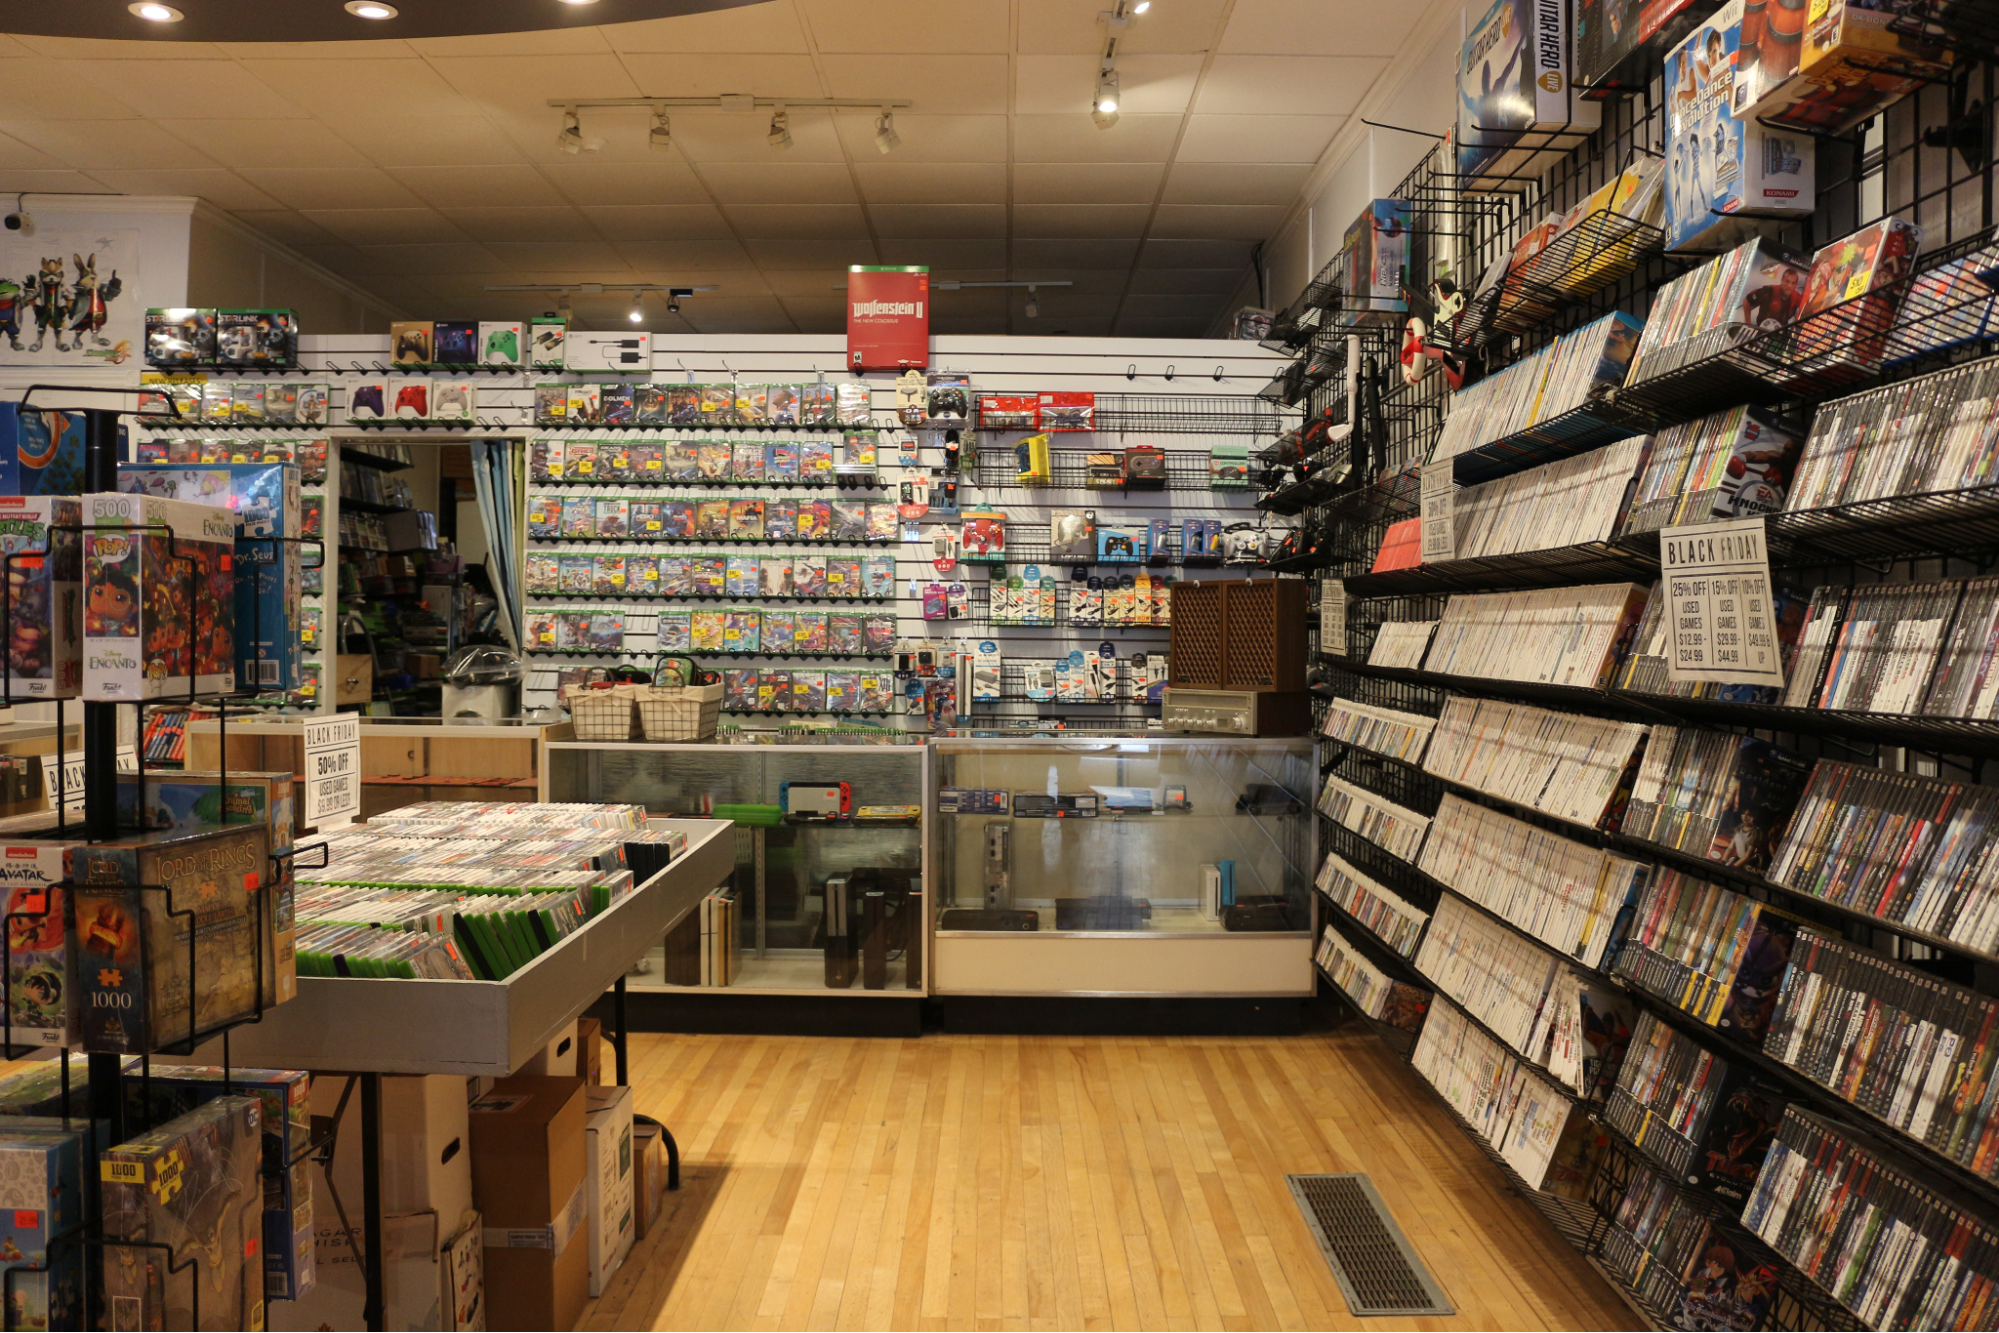  Iceman Video Games store with game cases lining the walls and toy collectible&nbsp;merchandise in the middle of the store. 